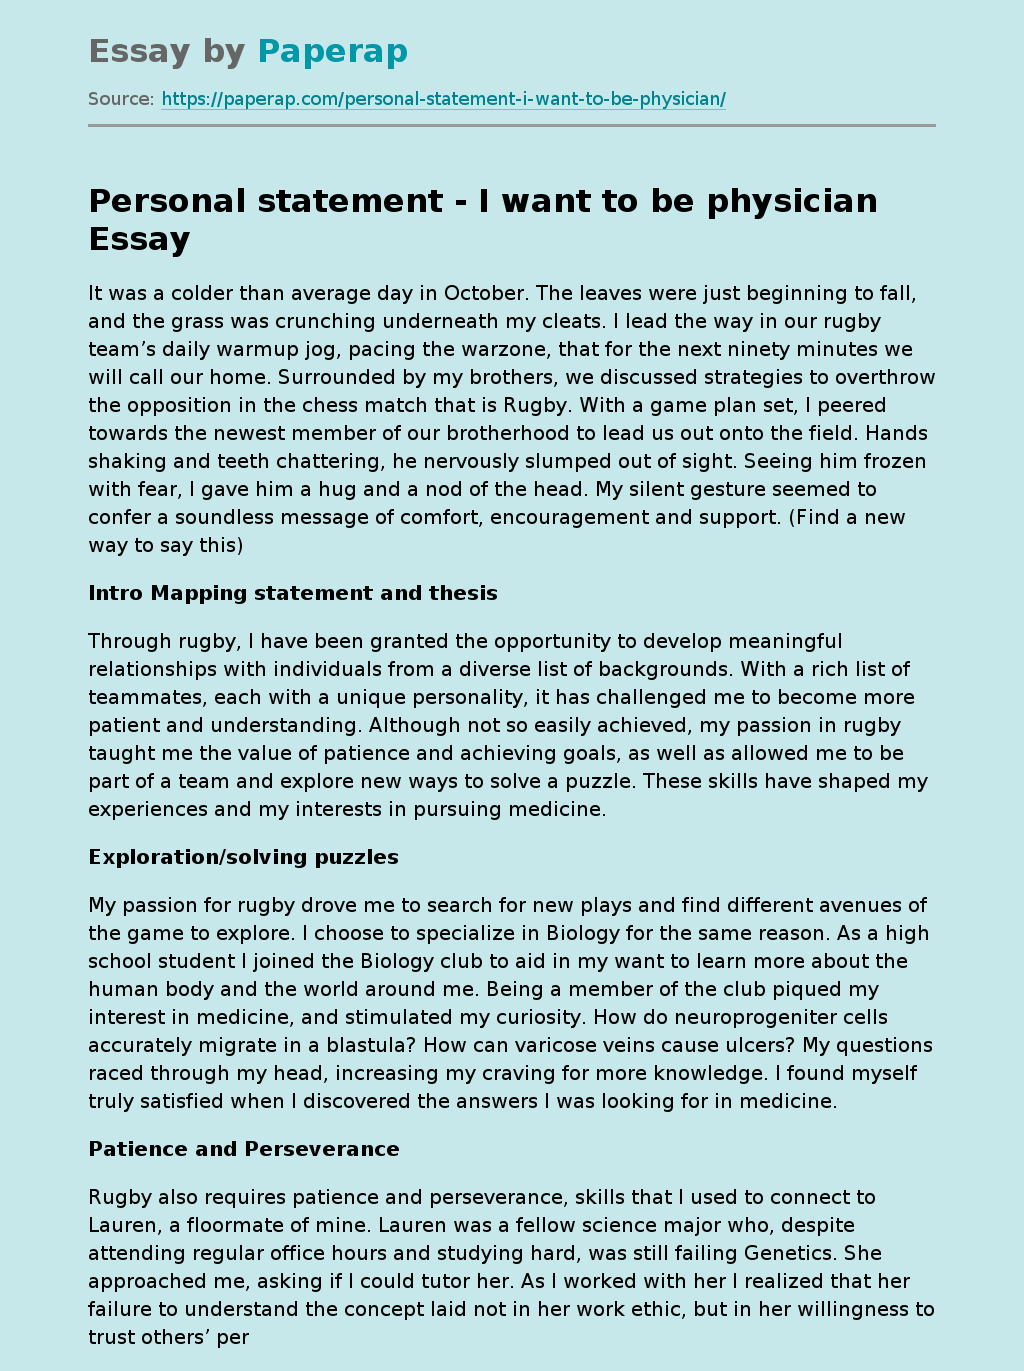 Personal statement - I want to be physician